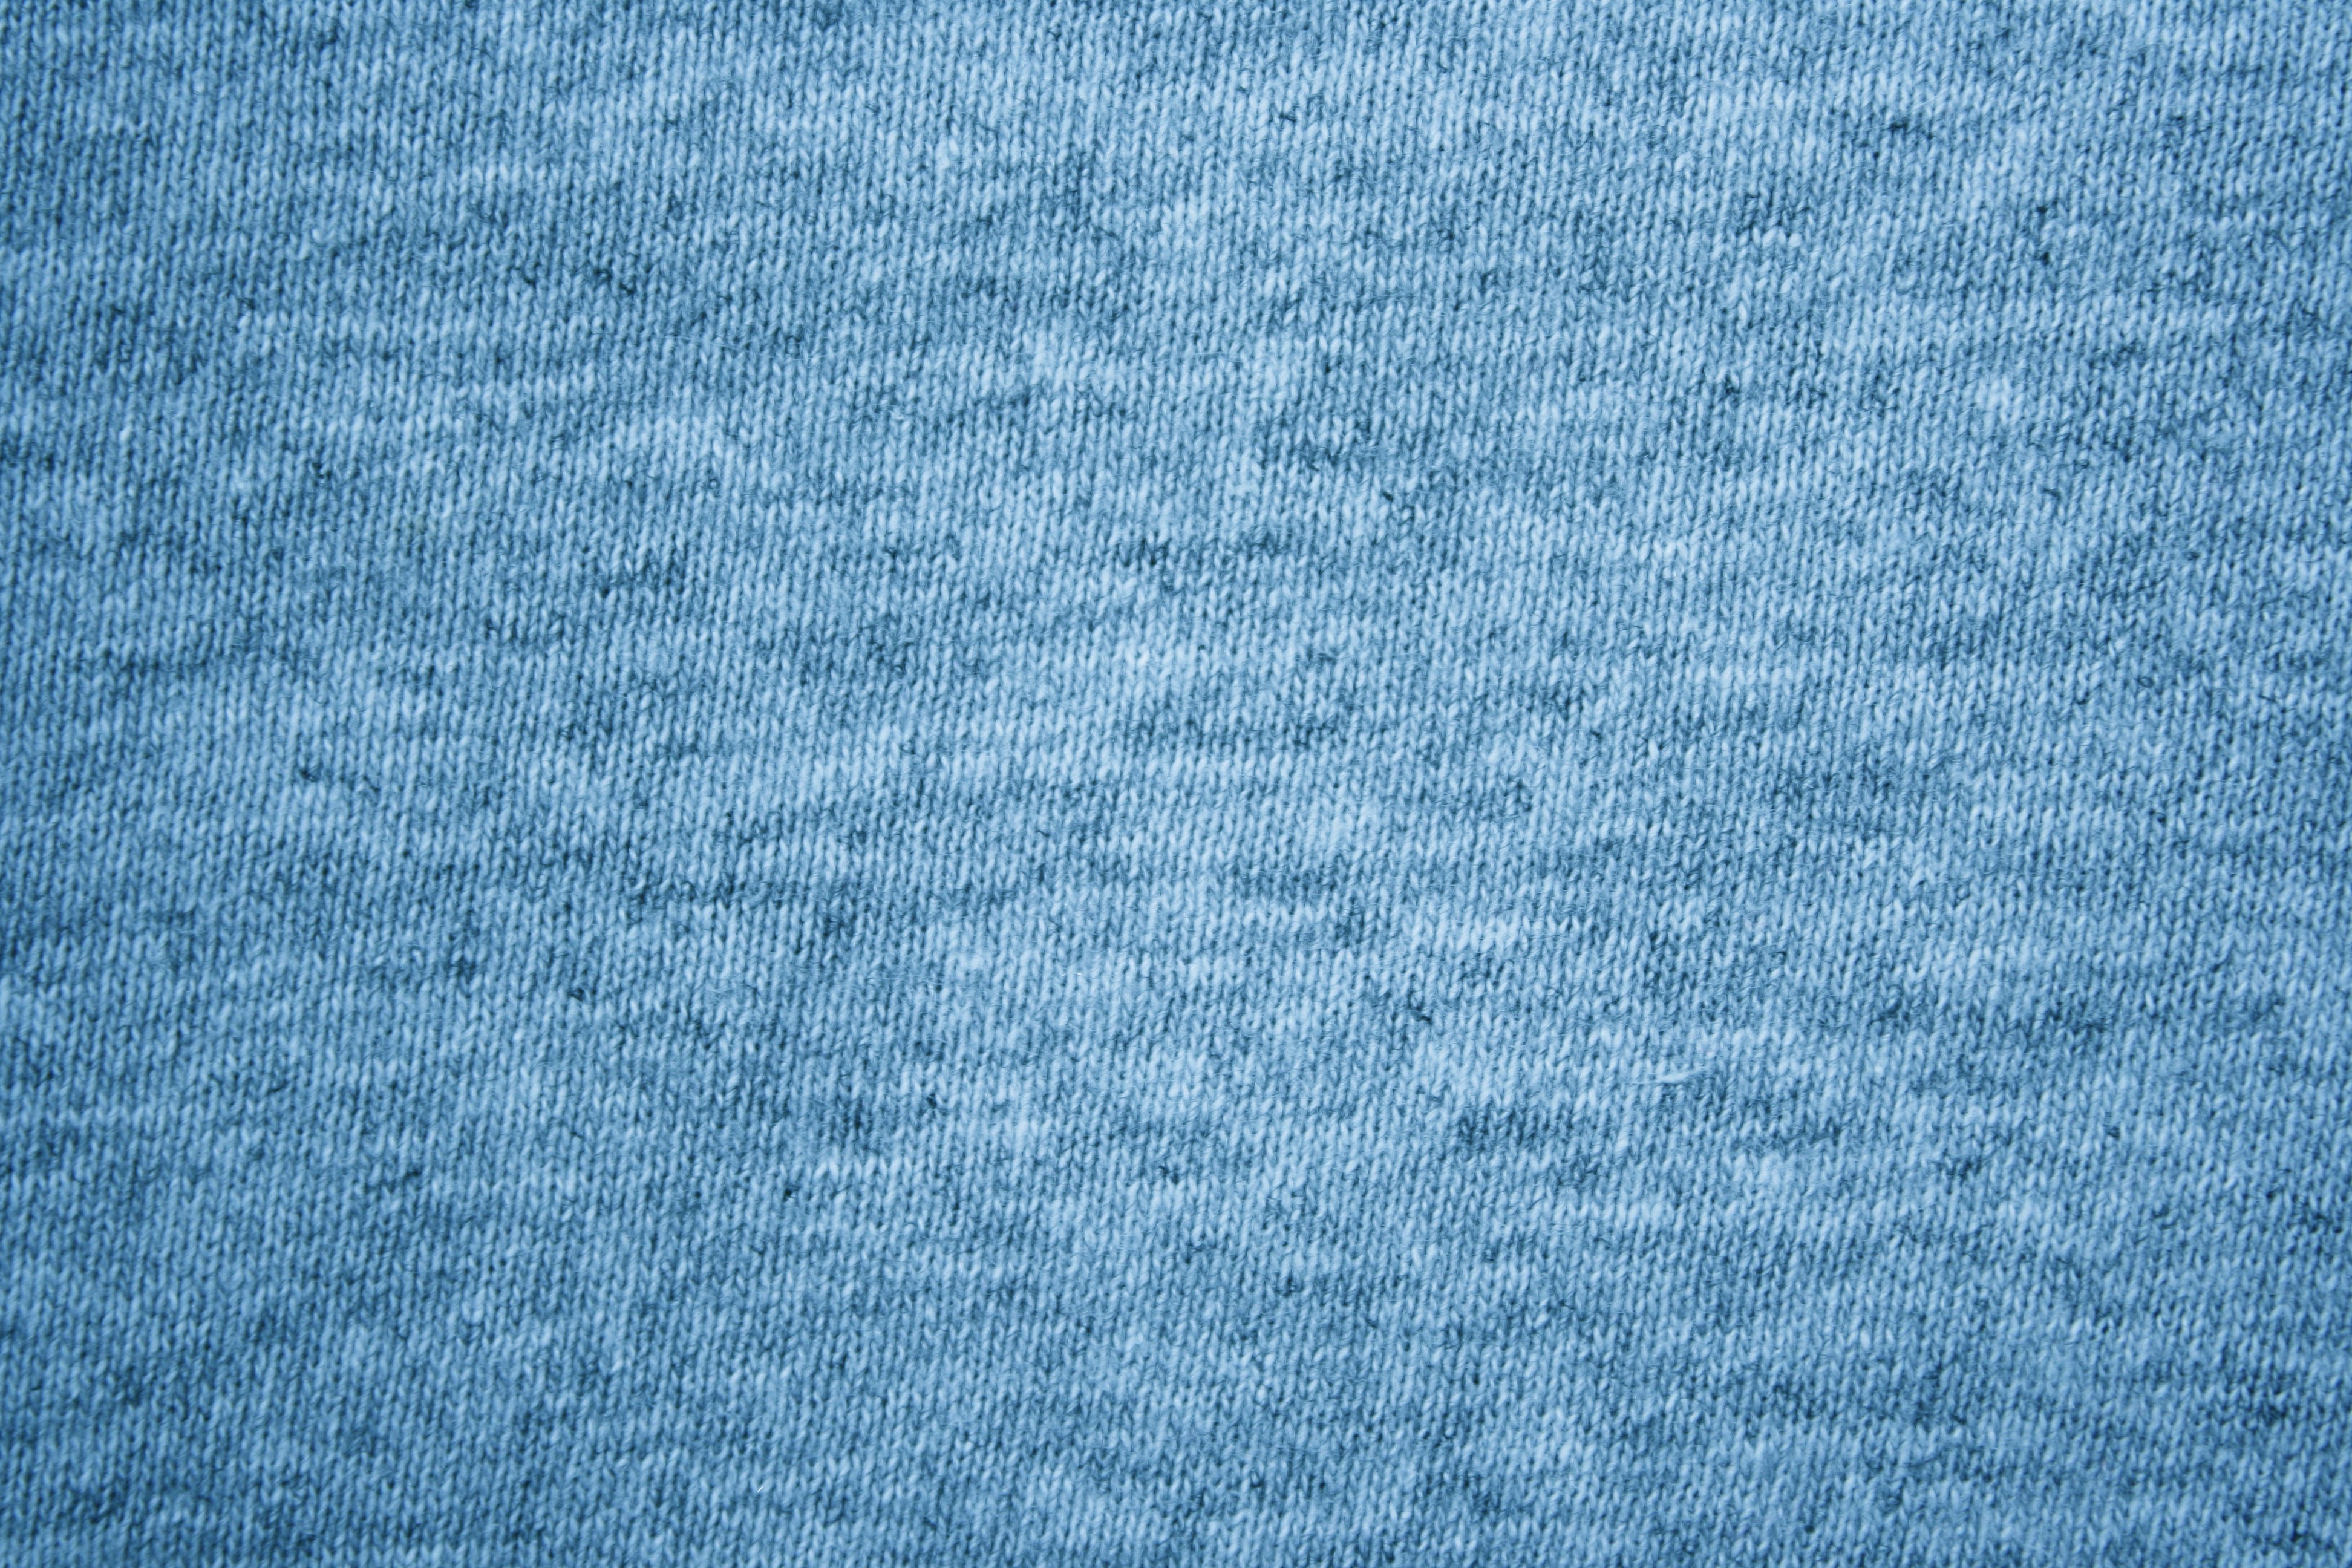 Light Blue Heather Knit T-Shirt Fabric Texture Picture | Free ...